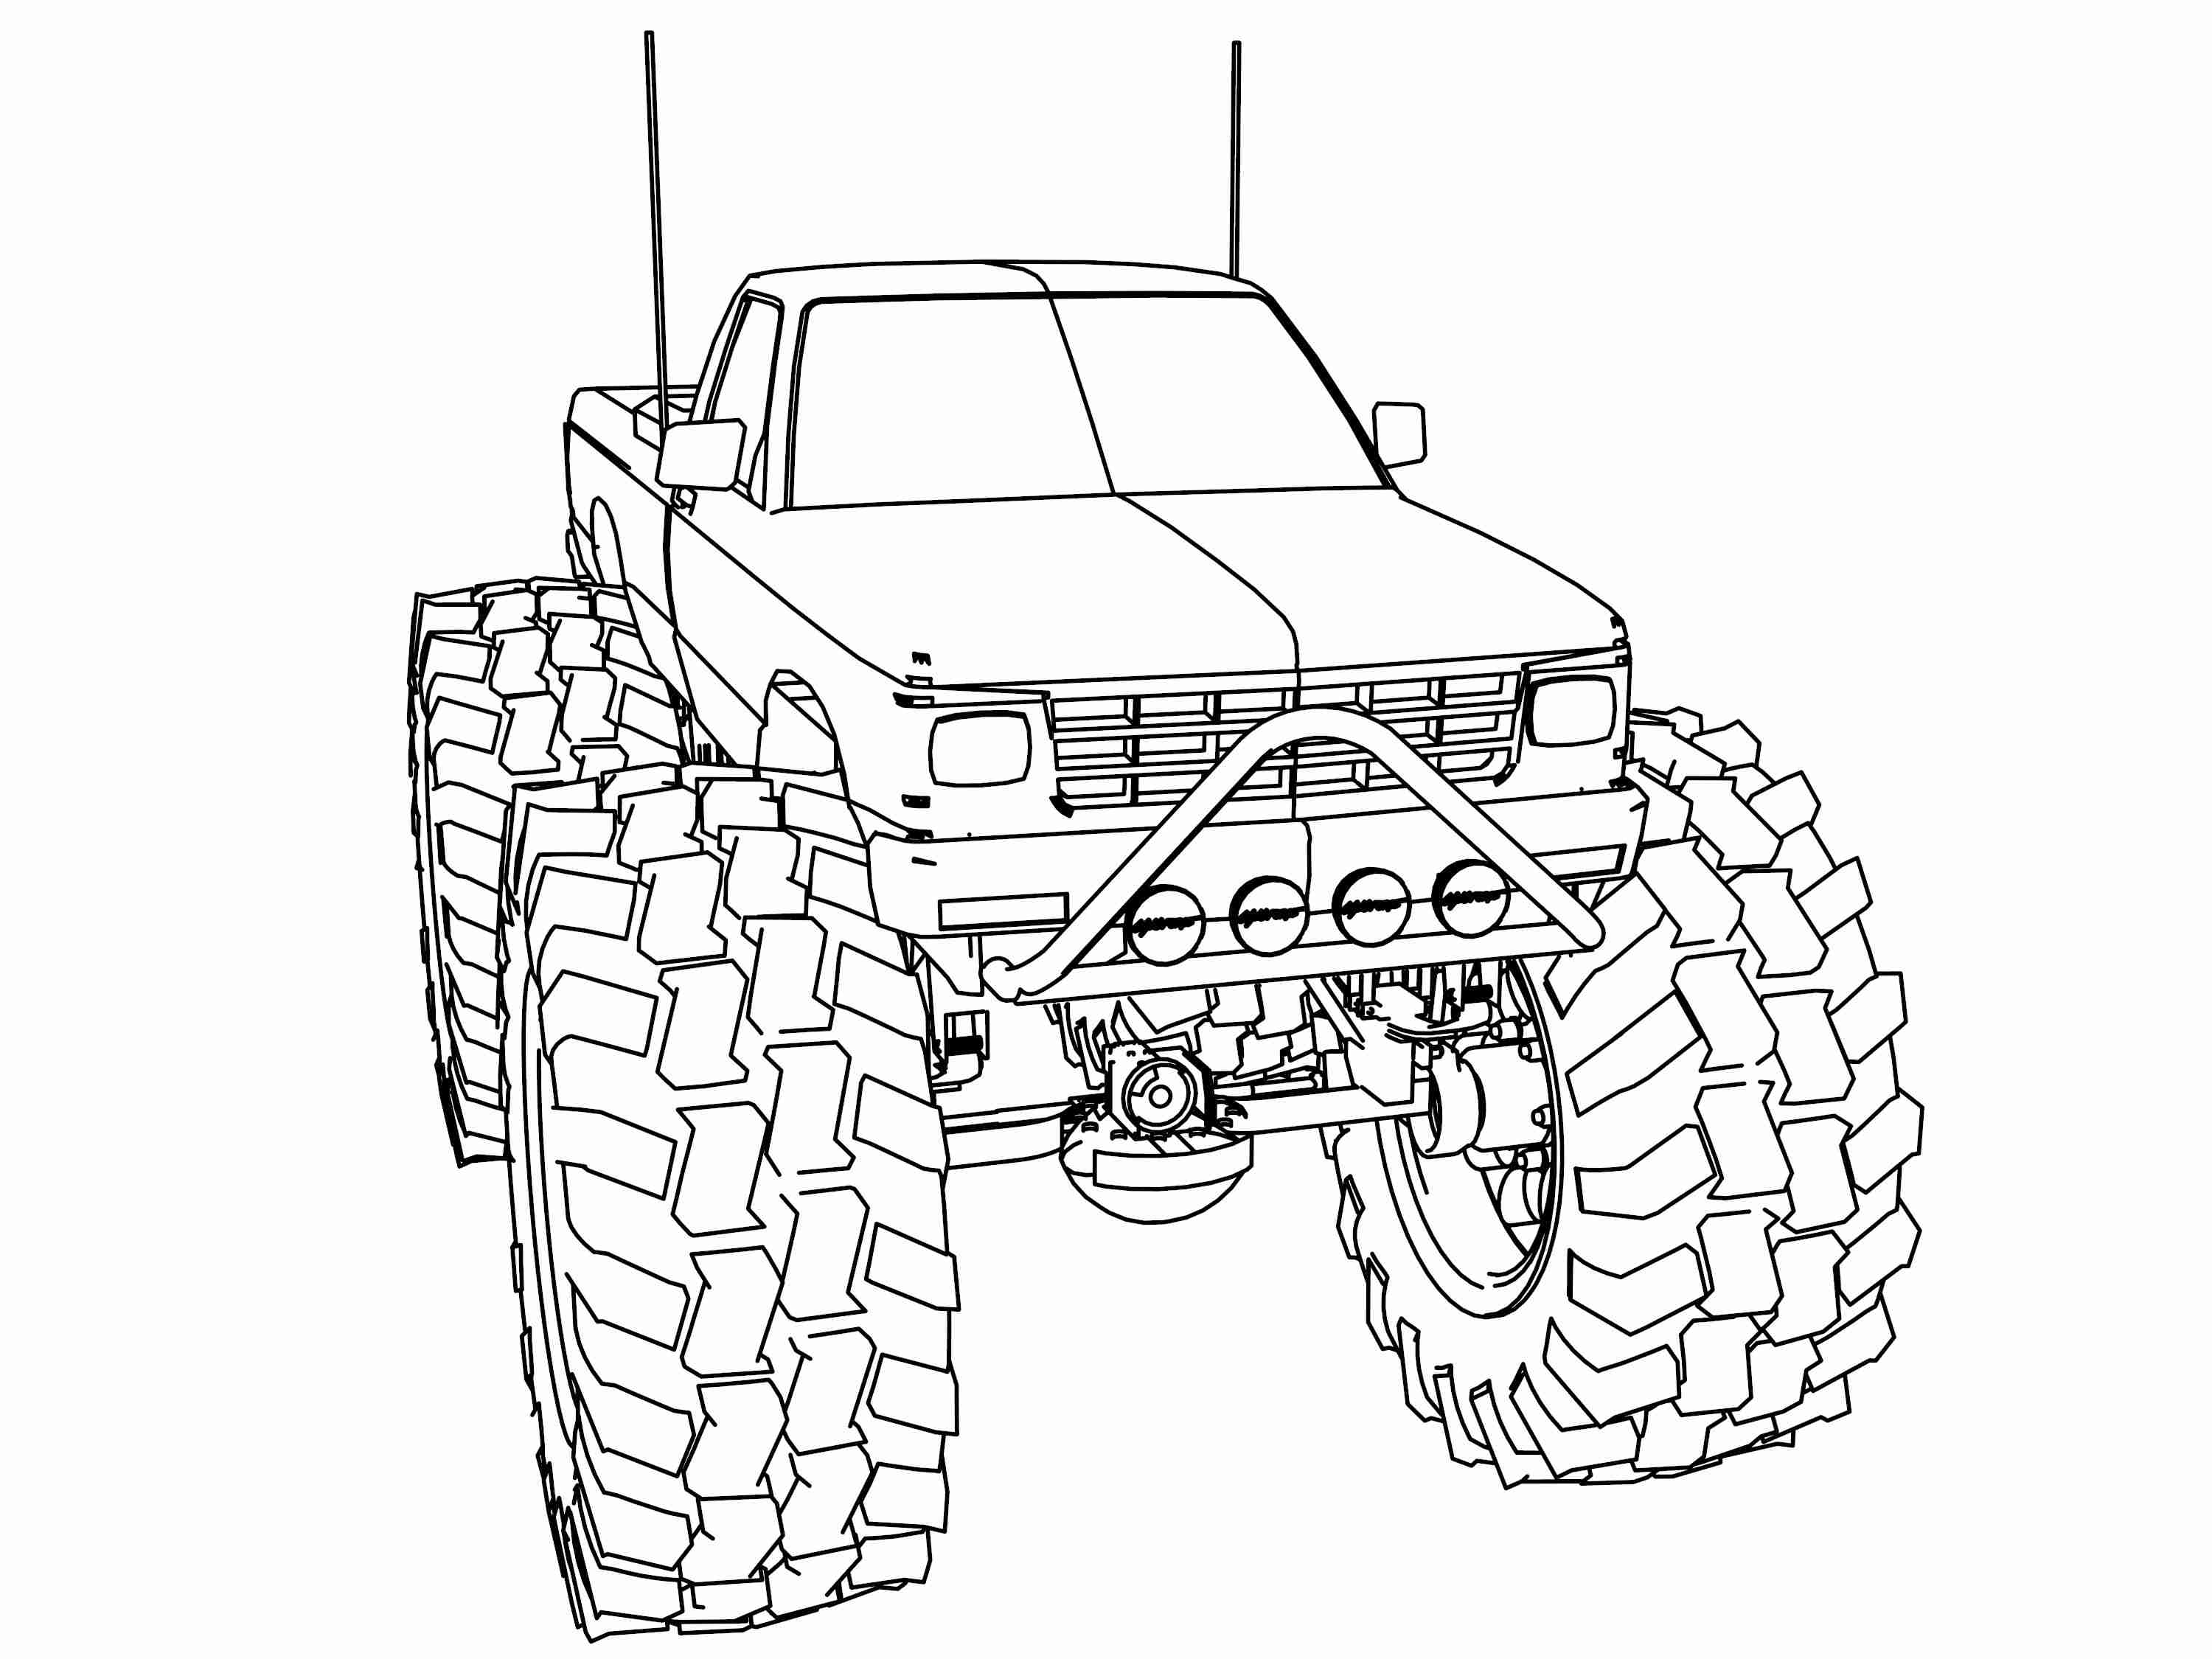 Chevy Pickup Coloring Pages at GetColorings.com | Free printable